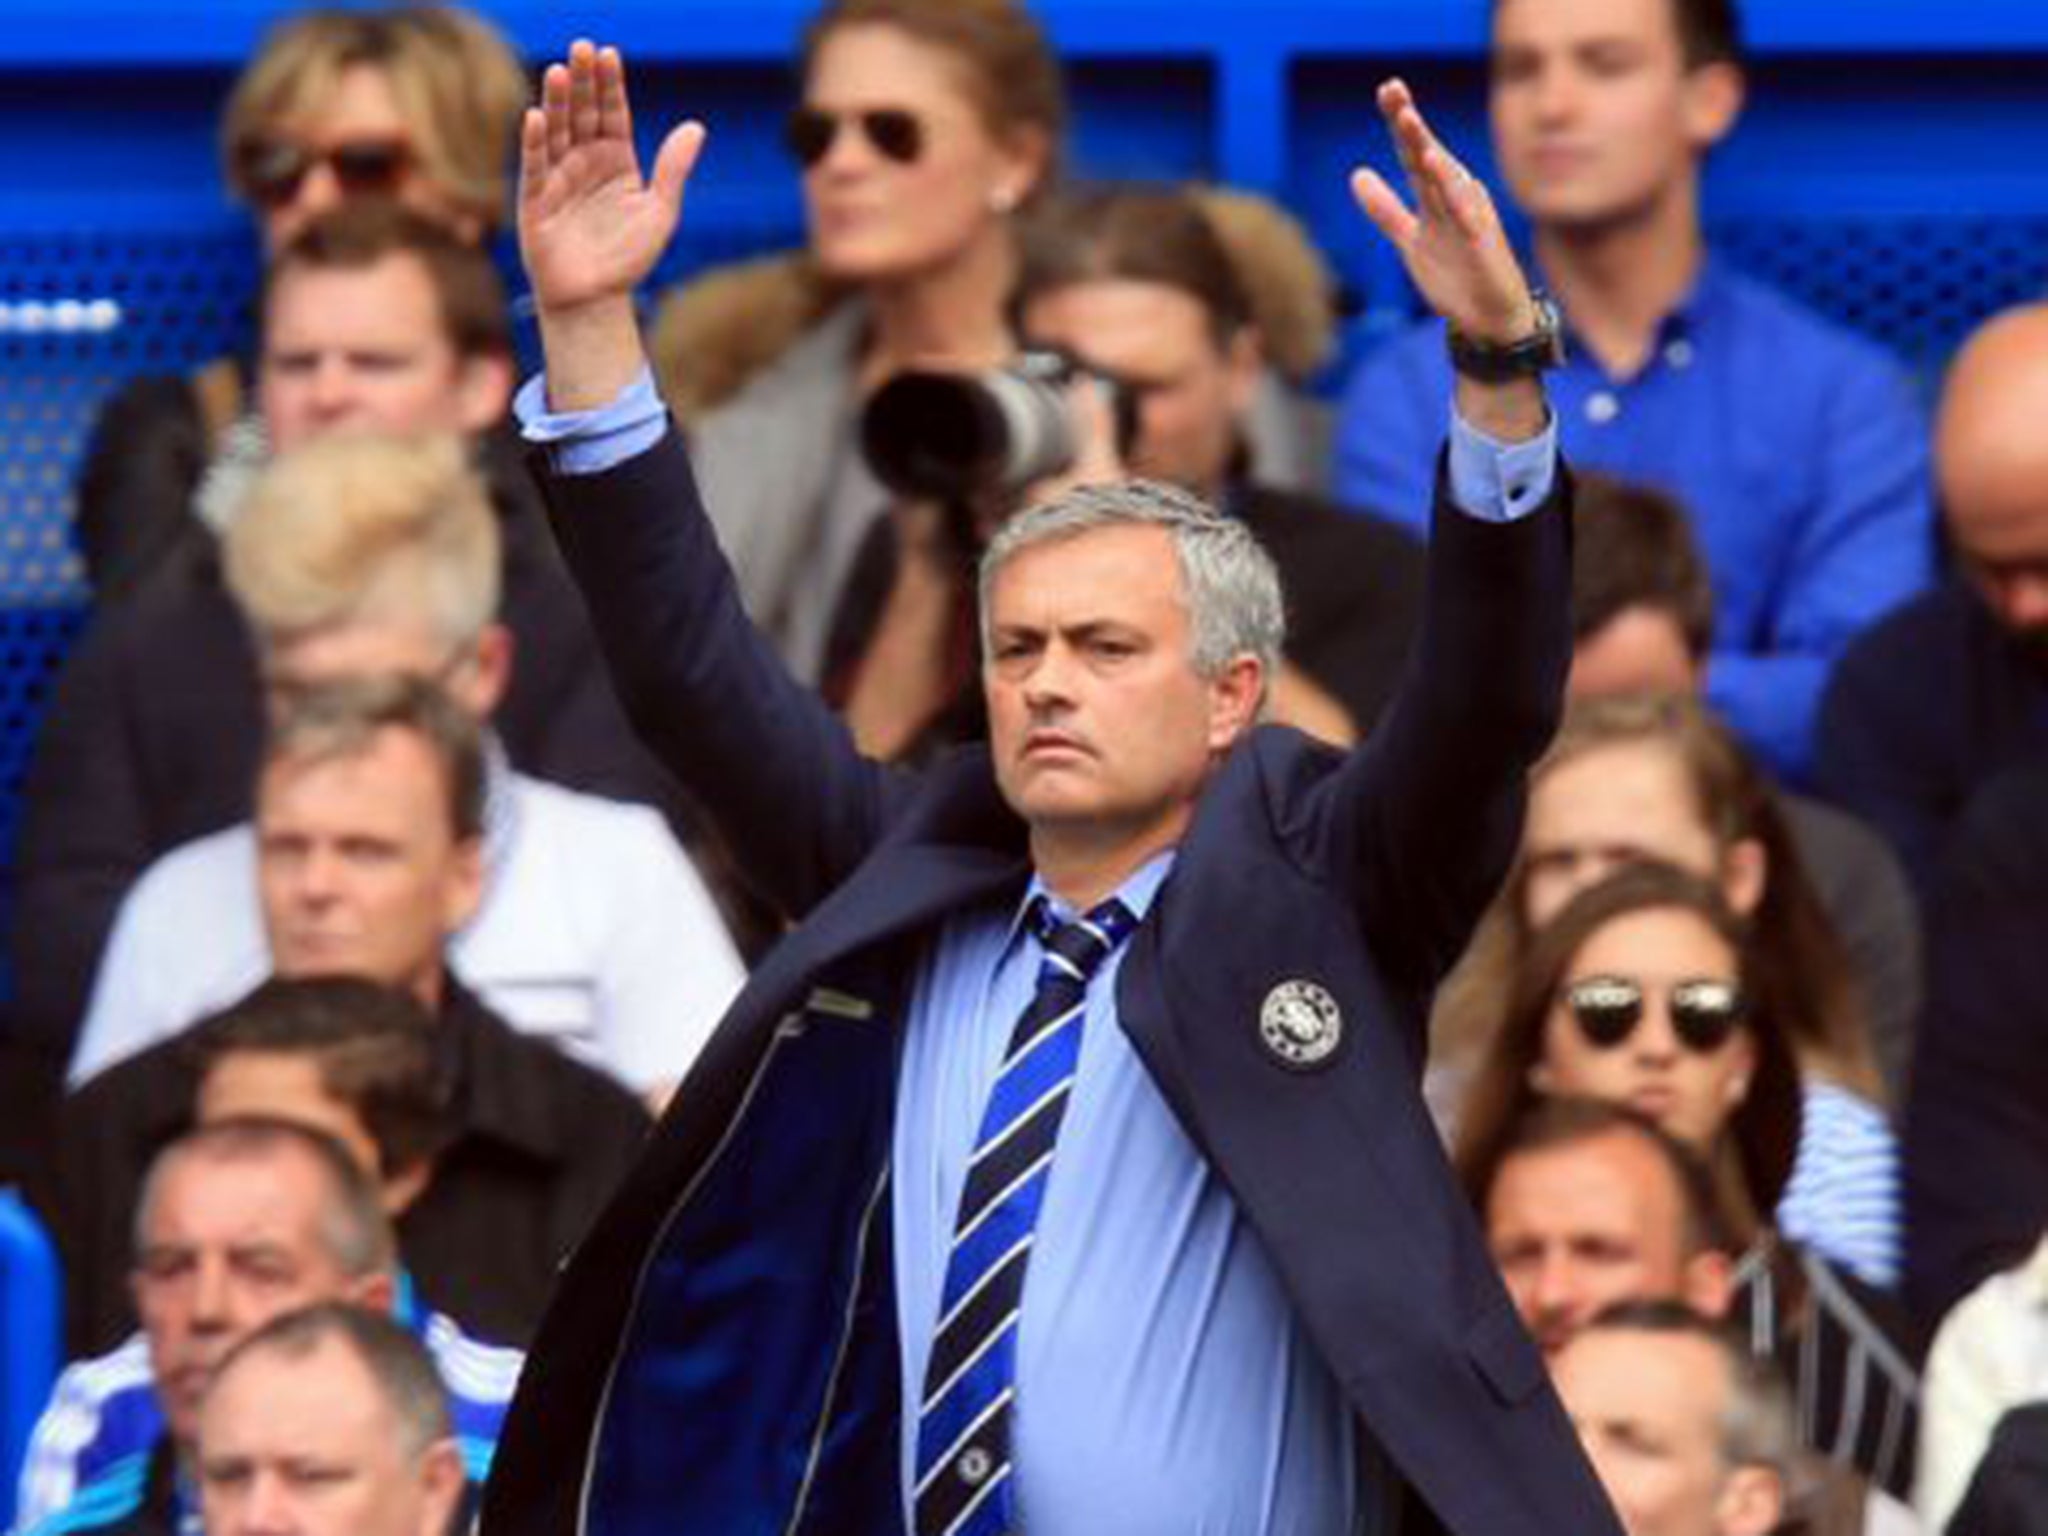 Jose Mourinho said he will manage another club after Chelsea